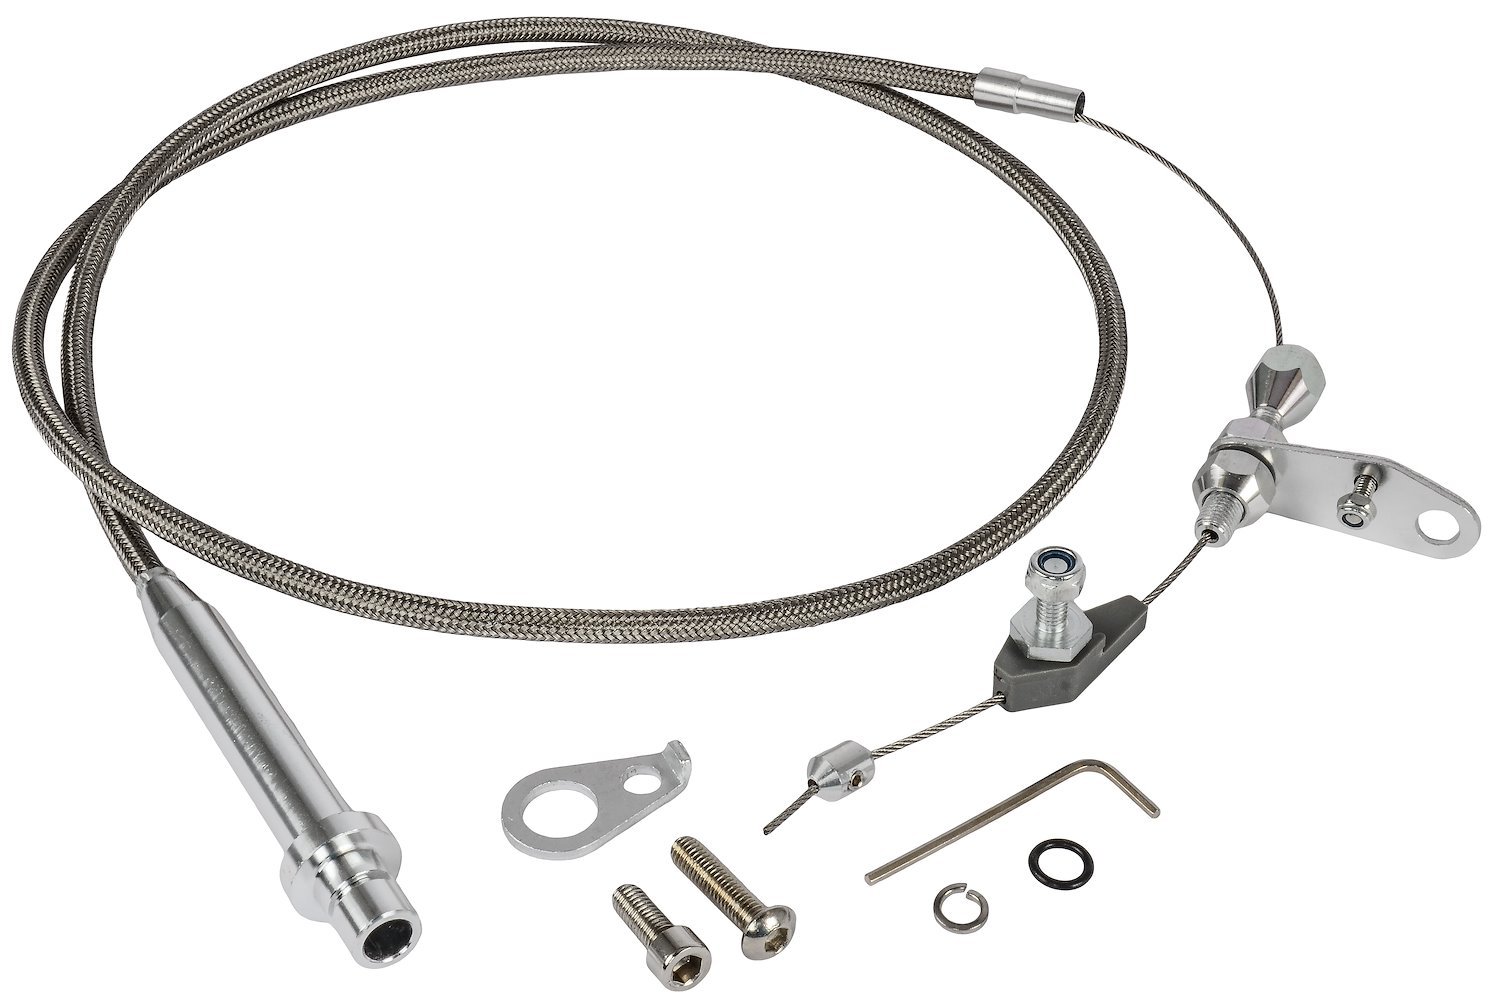 DEMOTOR PERFORMANCE TH-350 Stainless Braided Transmission Kick Down Cable Detent For SBC BBC Chevy Trans TH350 